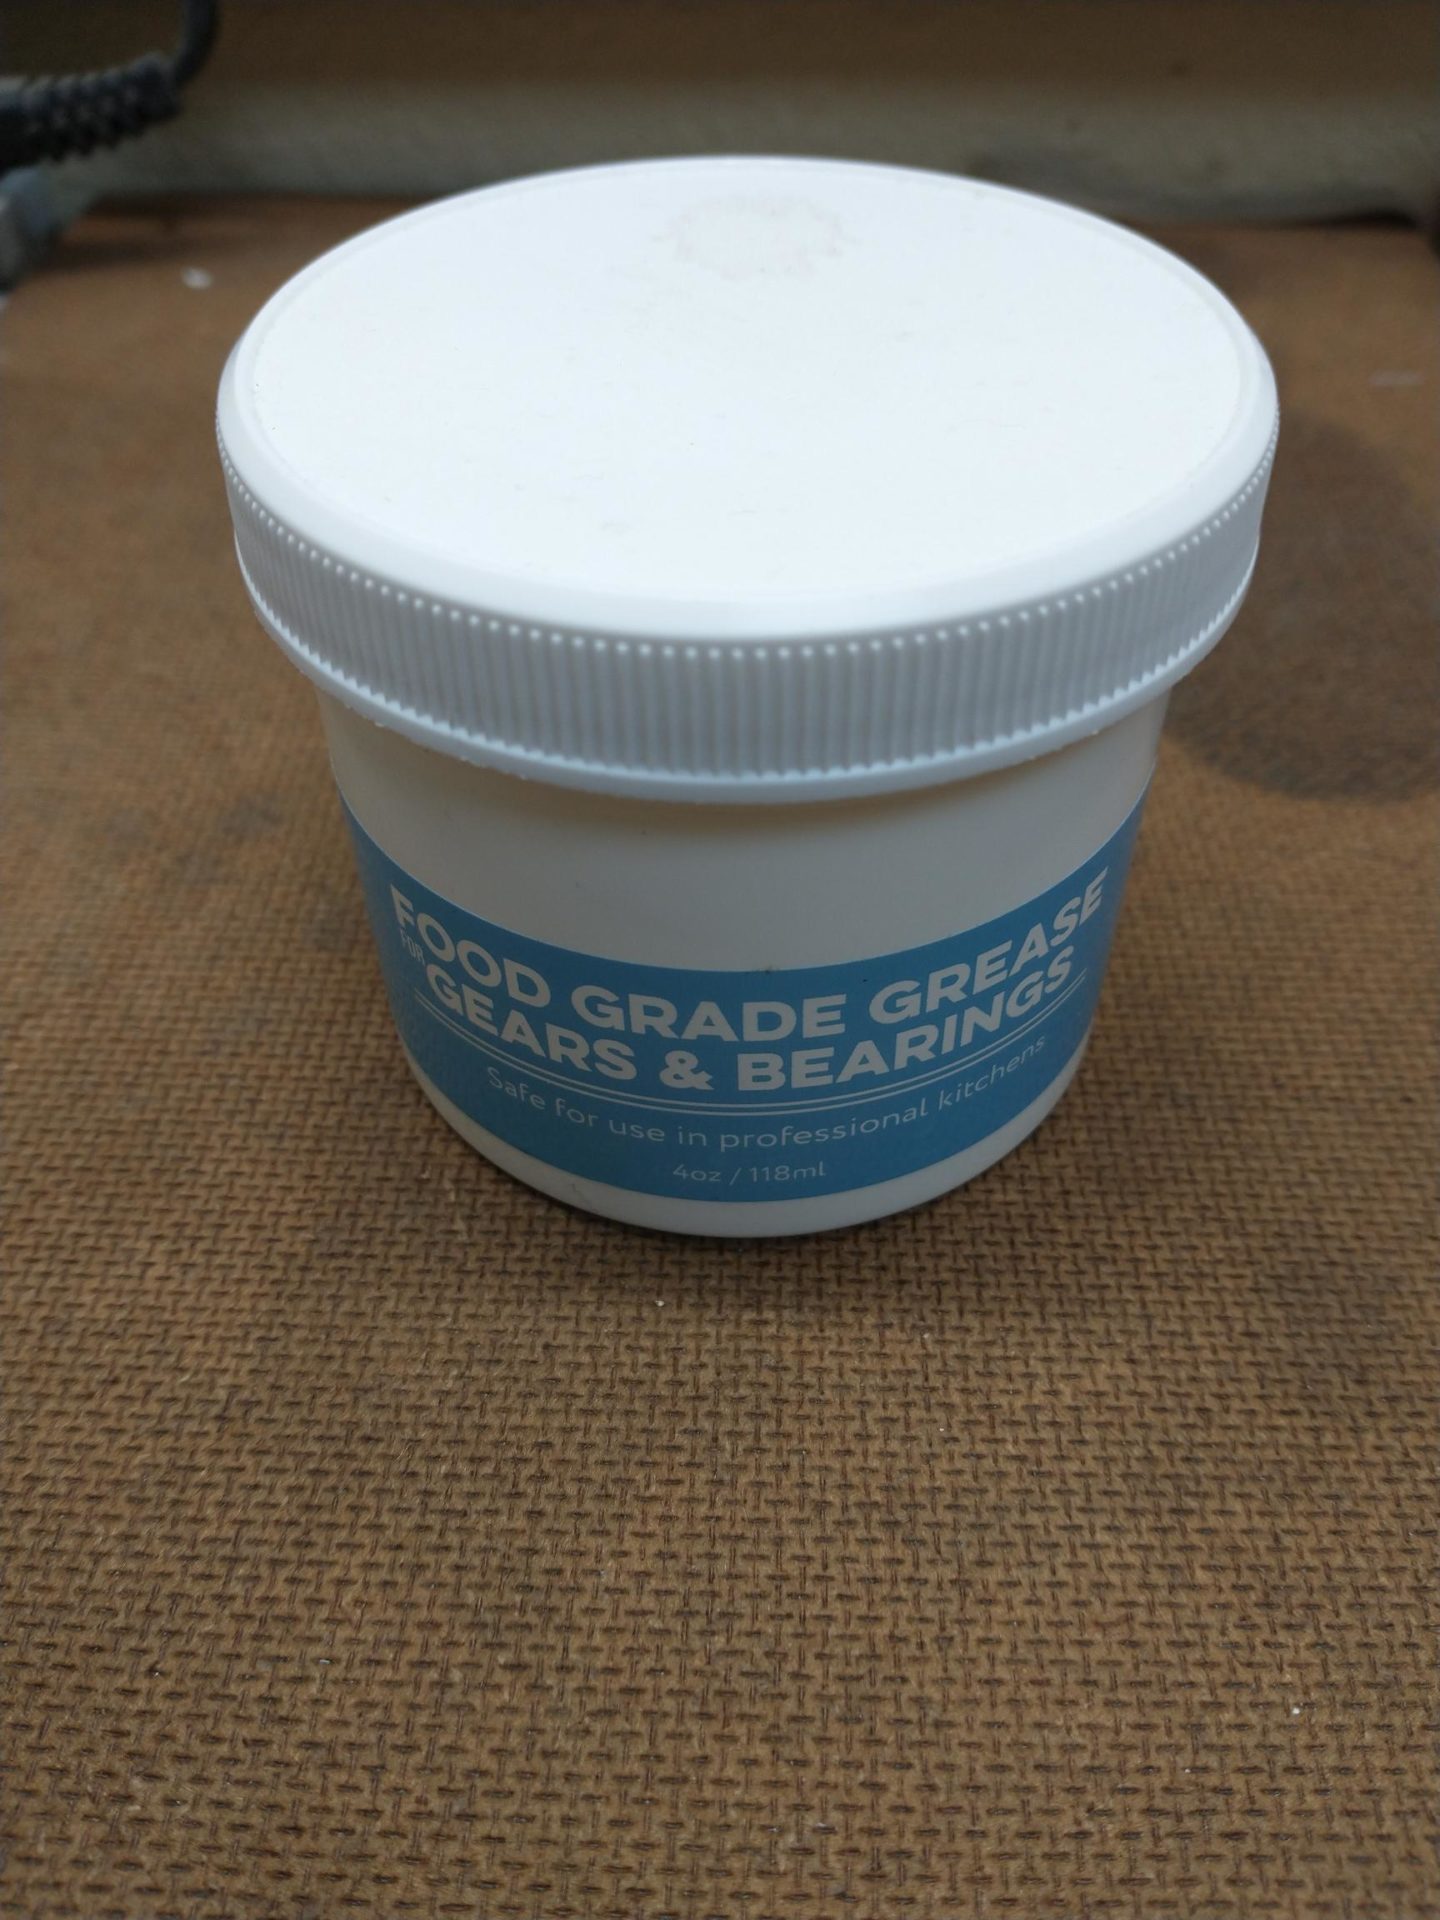 Food Grade Grease for Kitchen Aid Kitchenaid Mixers - Sold Per